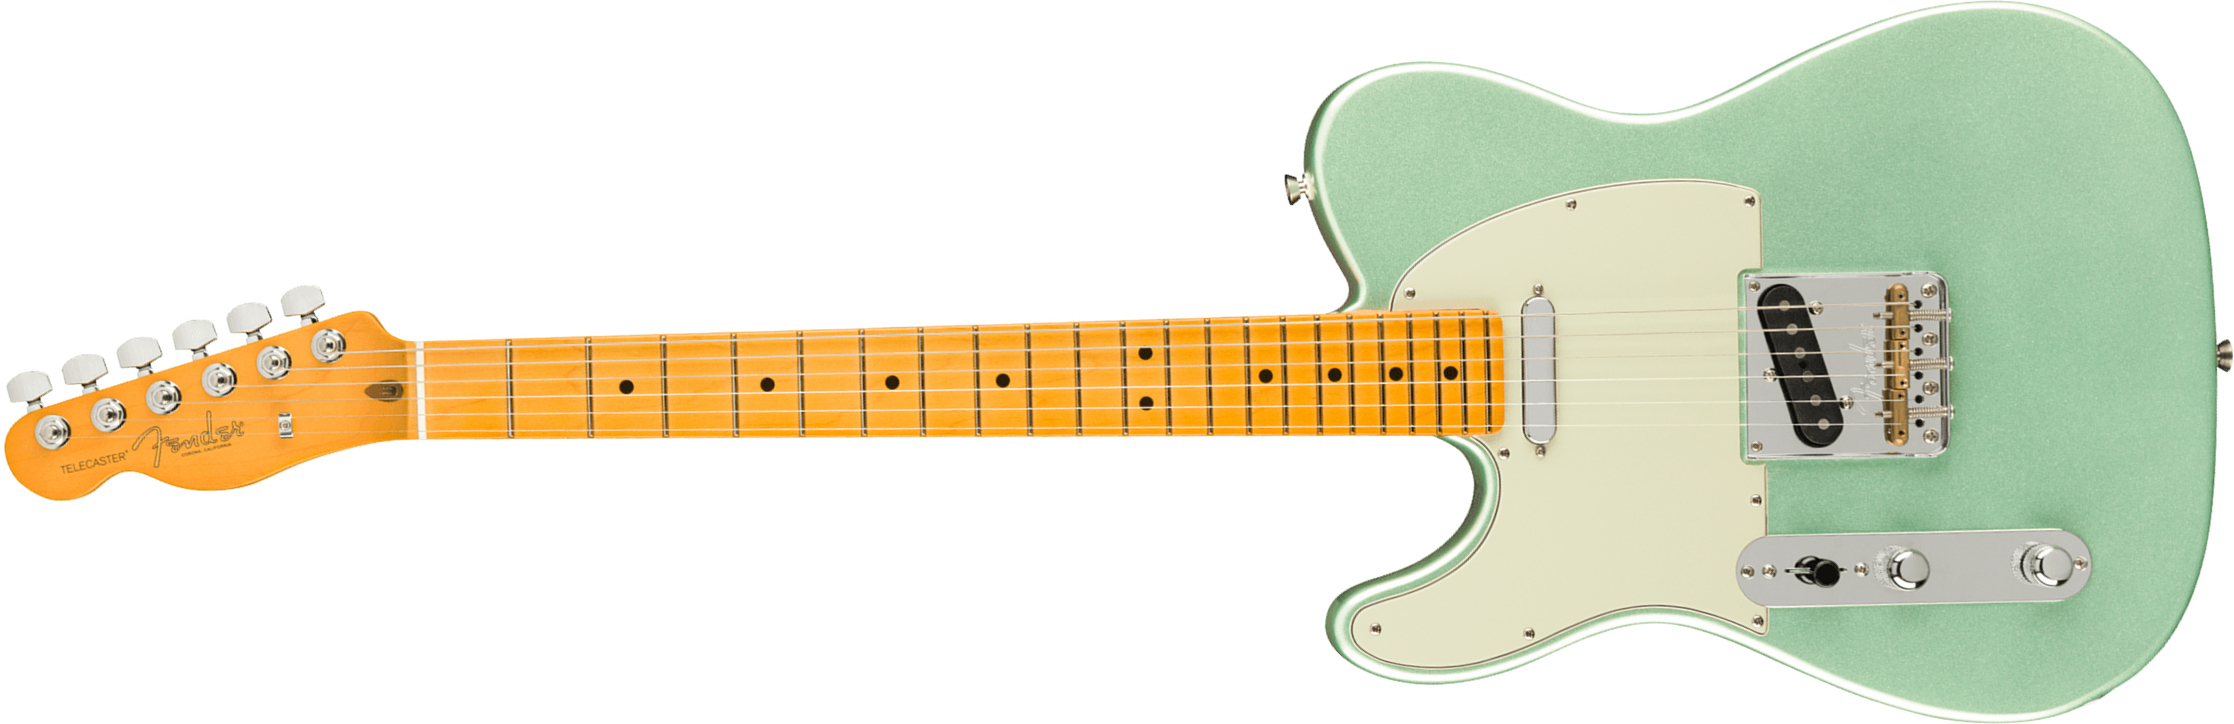 Fender Tele American Professional Ii Lh Gaucher Usa Mn - Mystic Surf Green - Left-handed electric guitar - Main picture